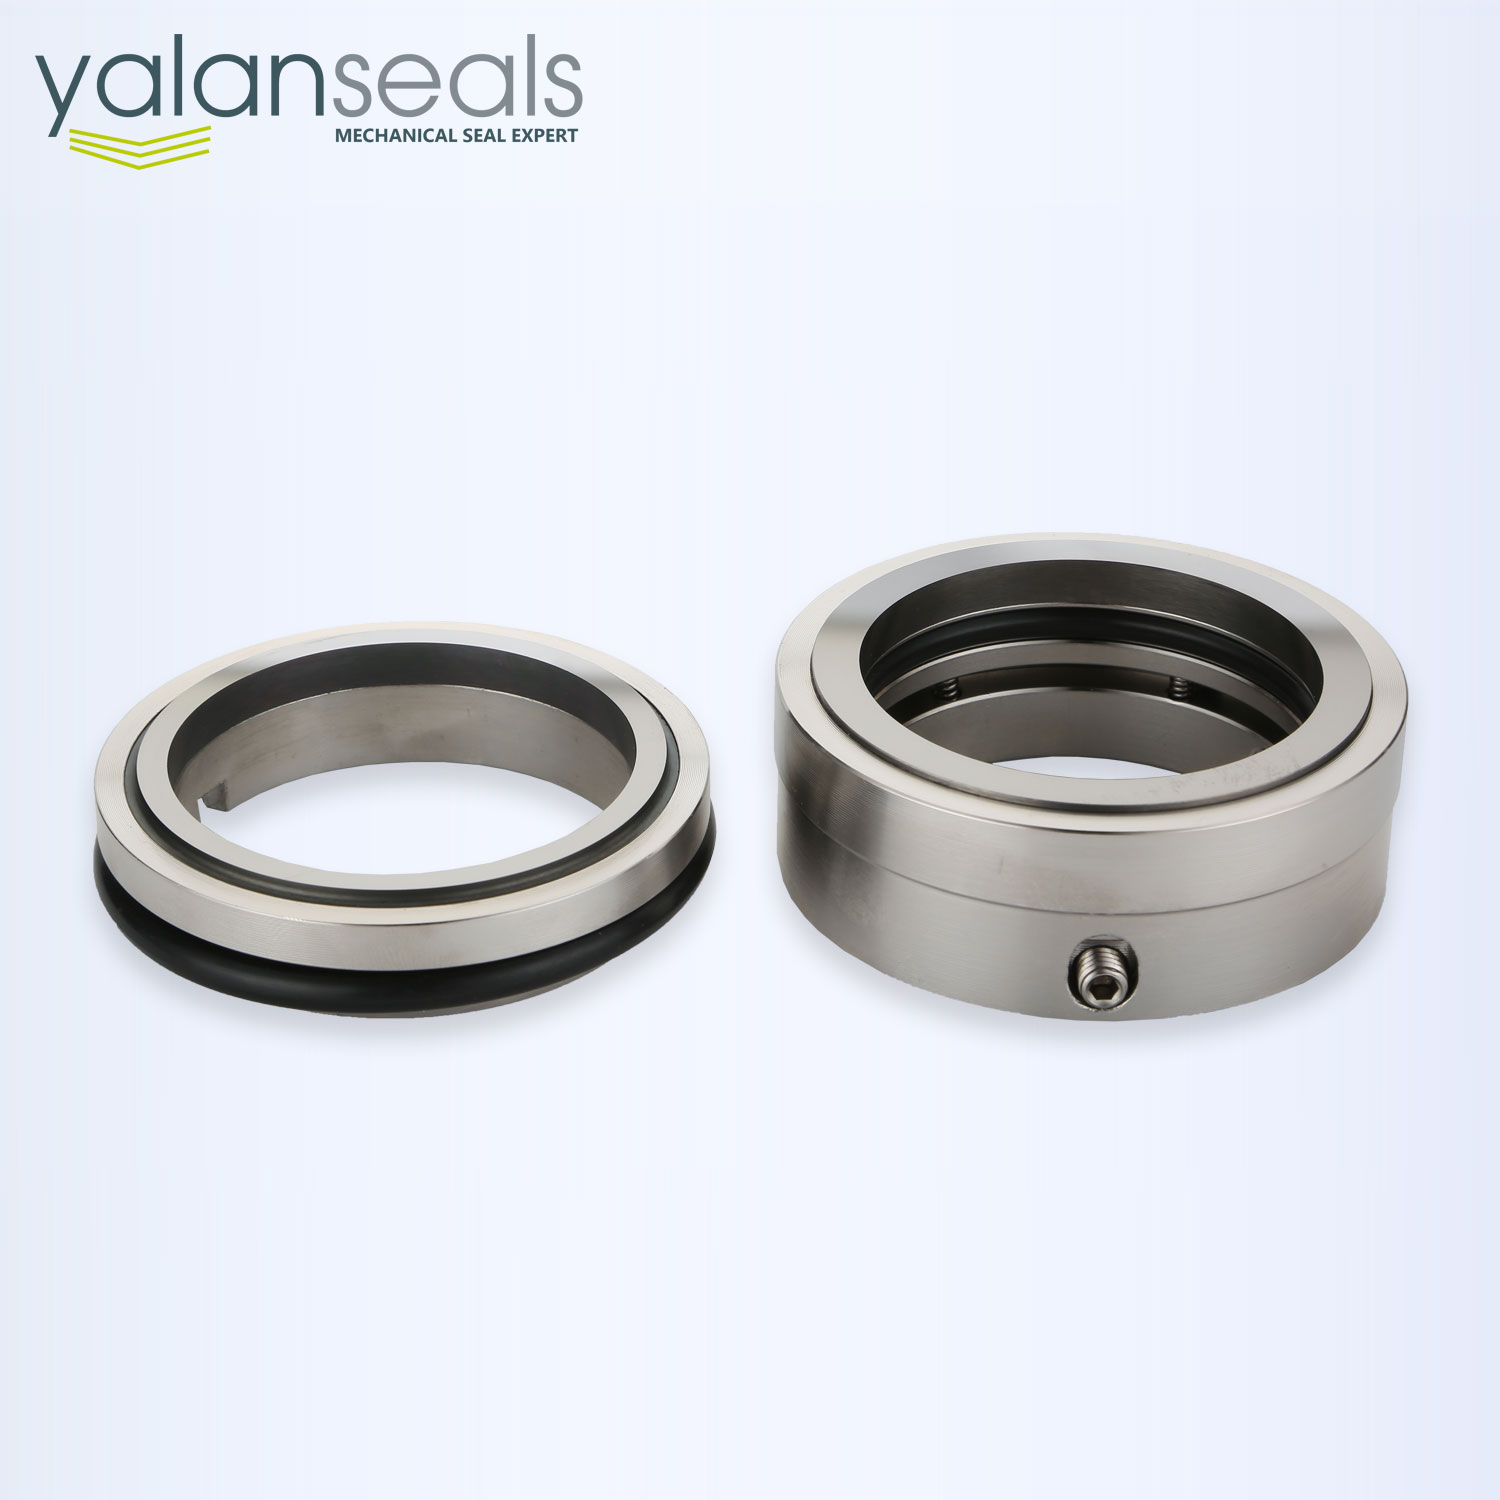 M524-2 Mechanical Seal for Immersible Pumps